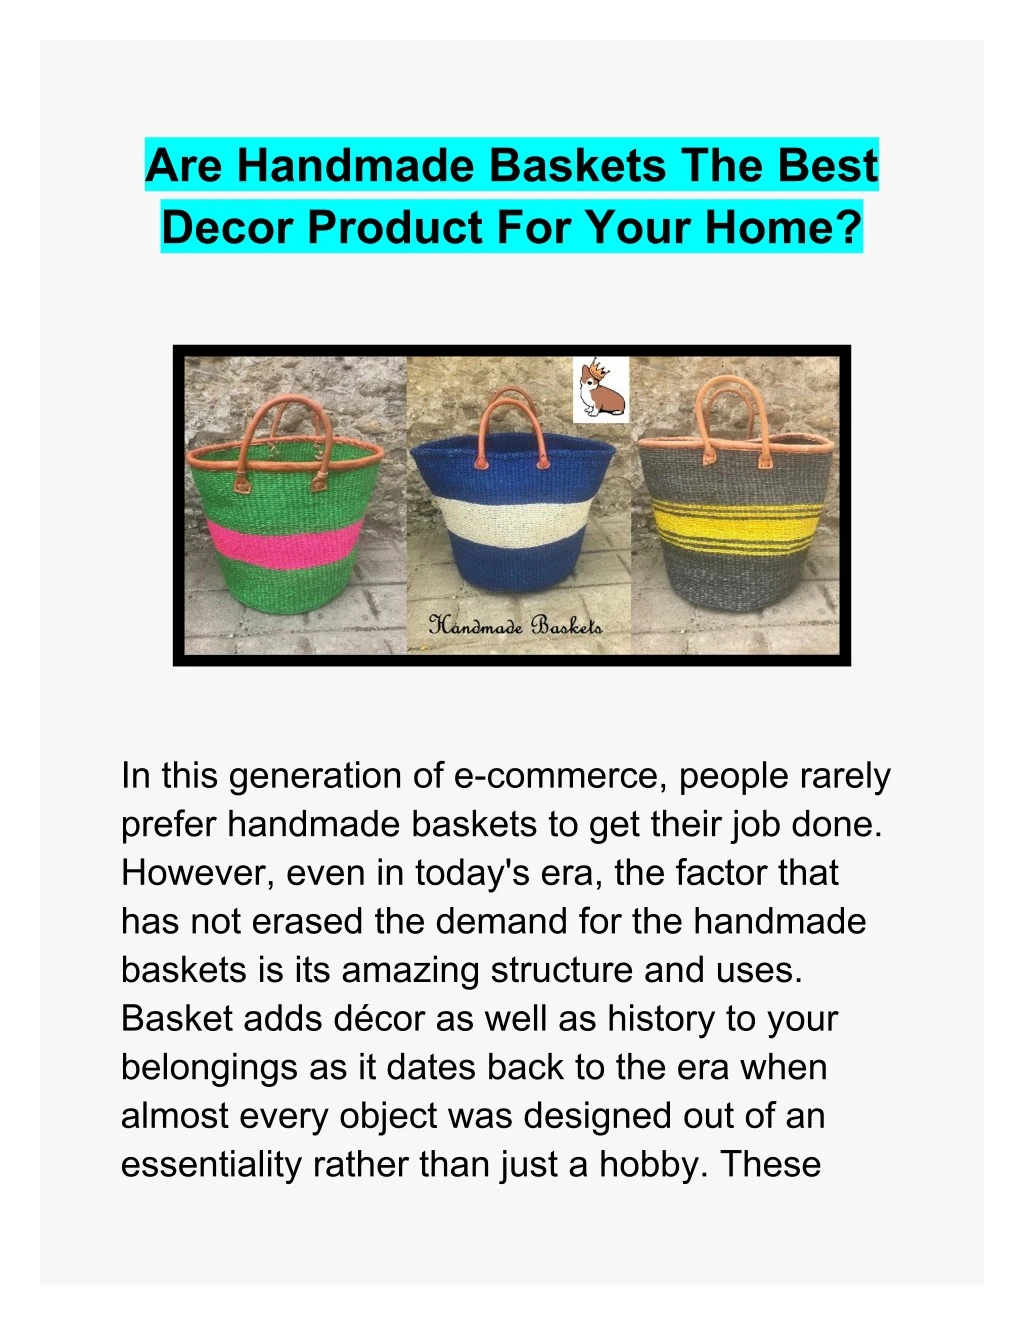 are handmade baskets the best decor product